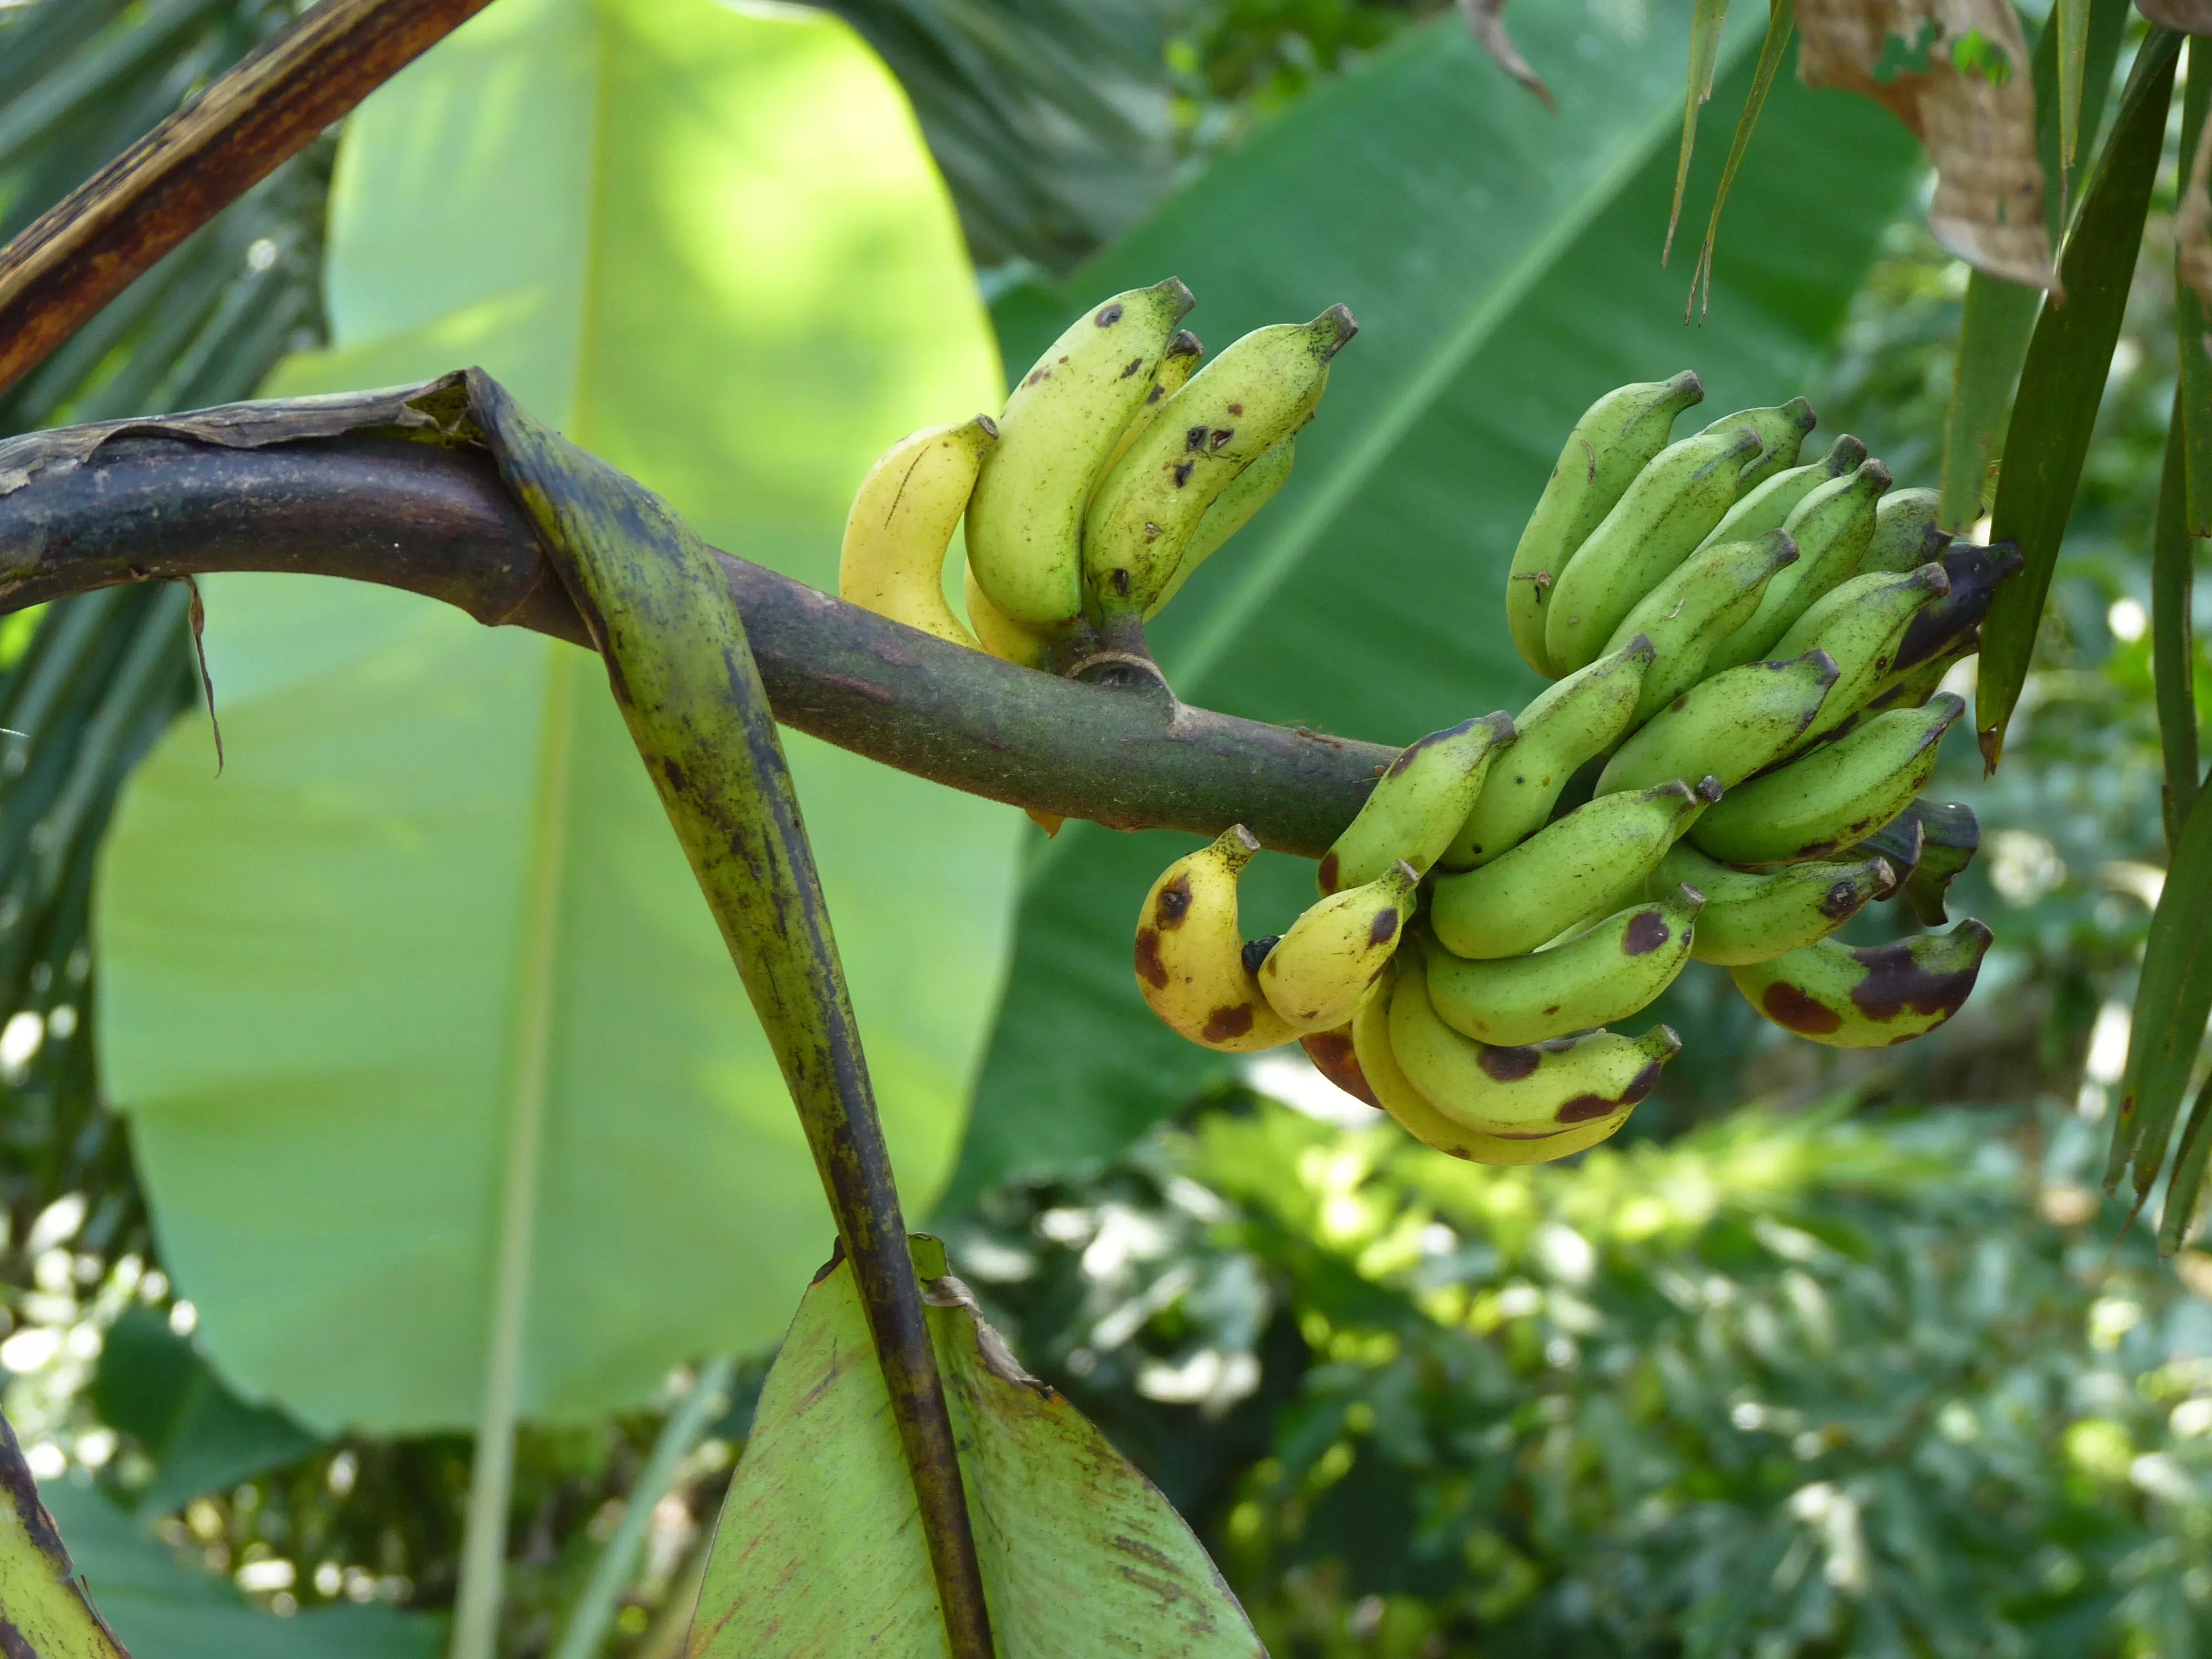 A lush green scene shows a banana plant in full fruit